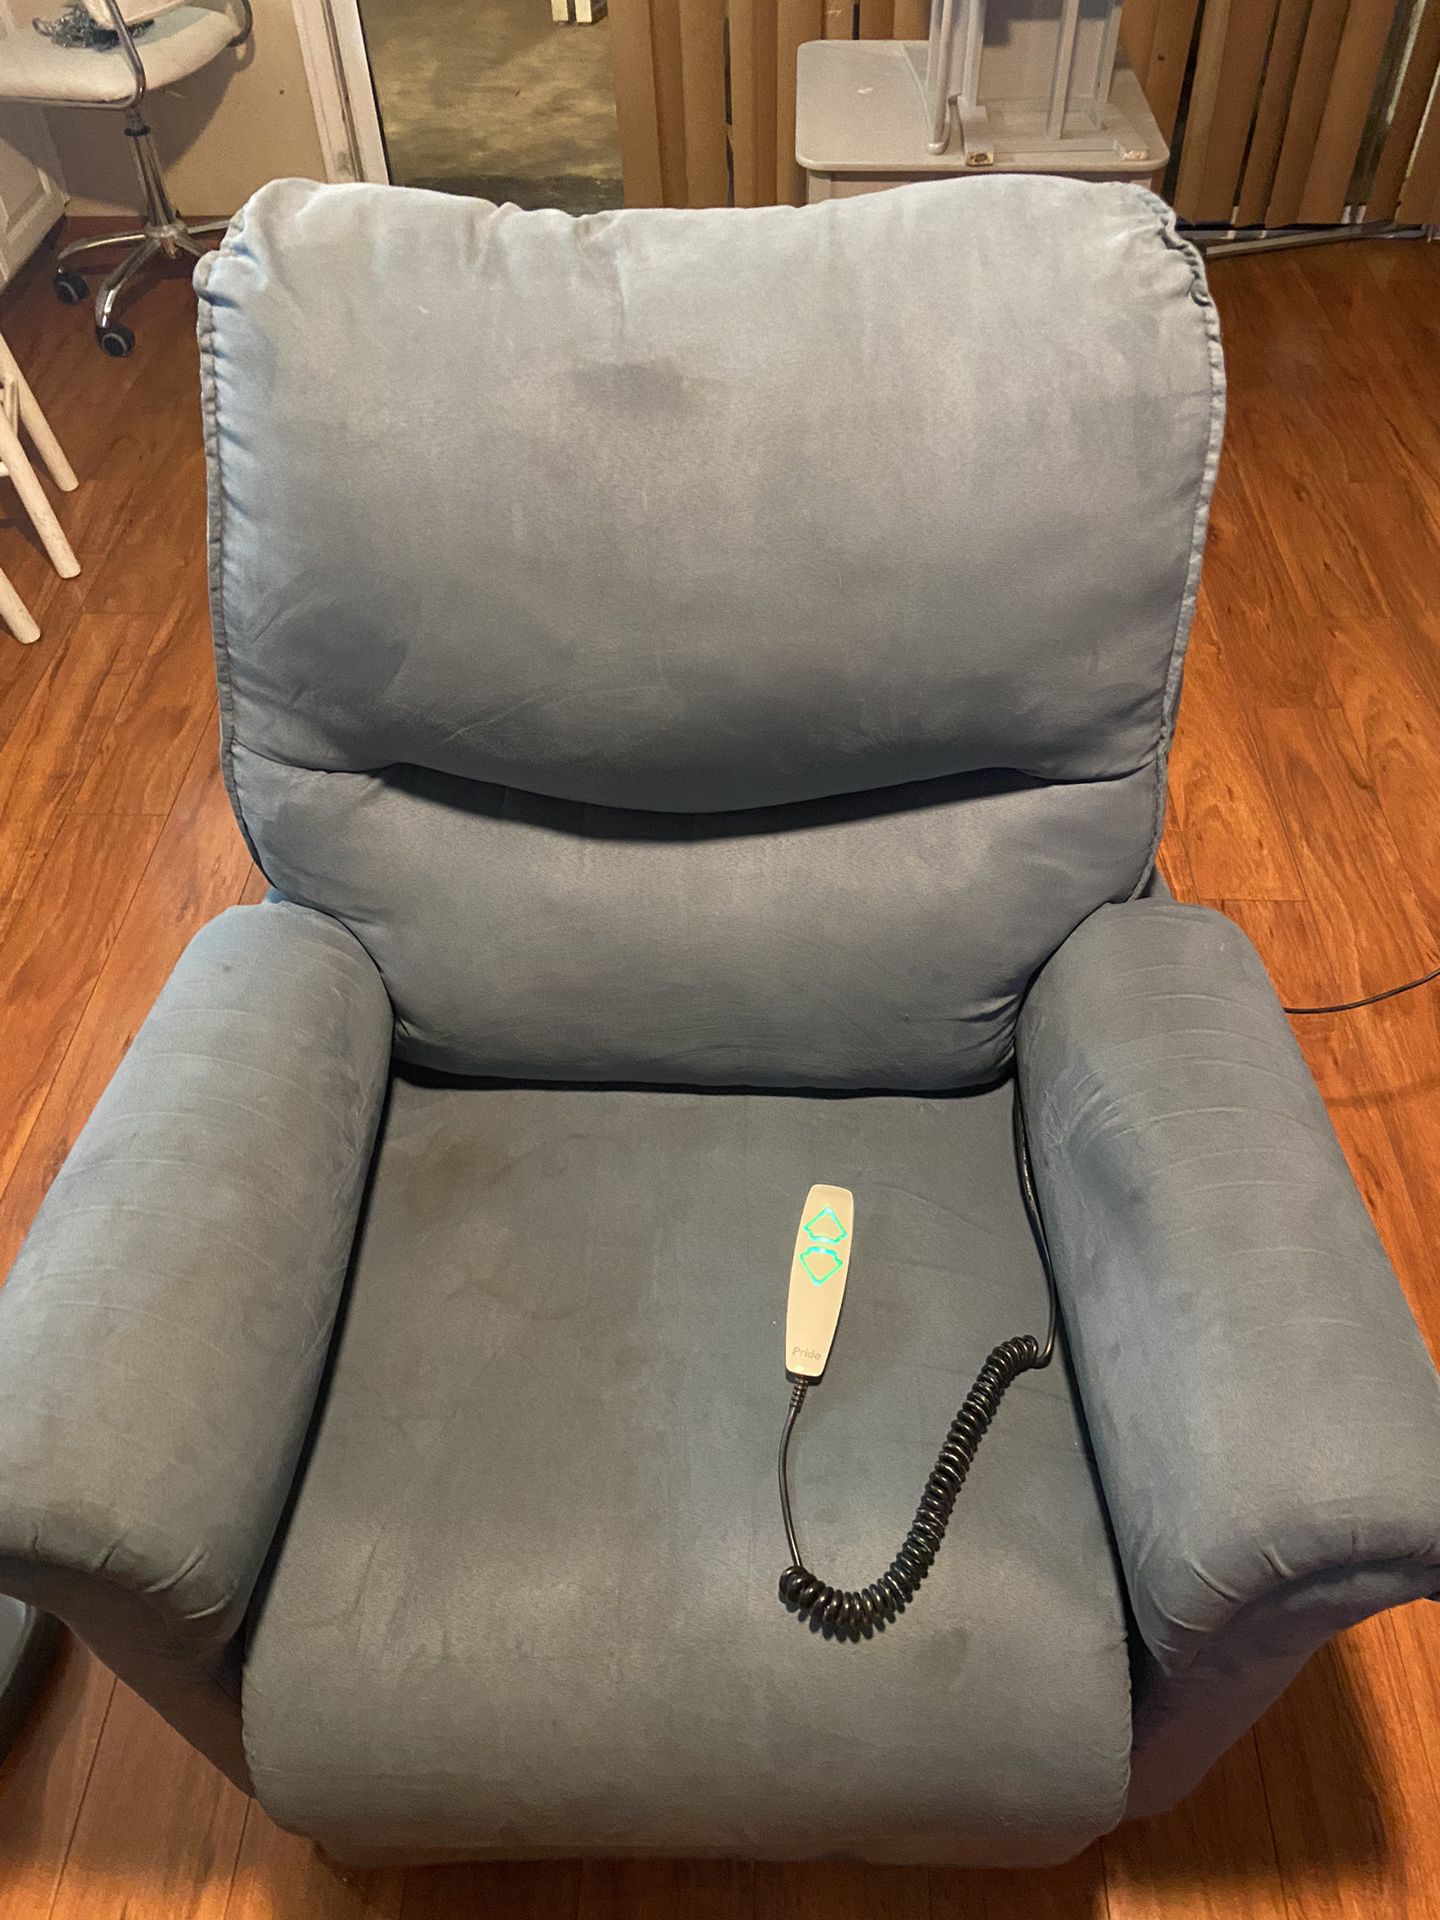 Electric Reclining Chair 